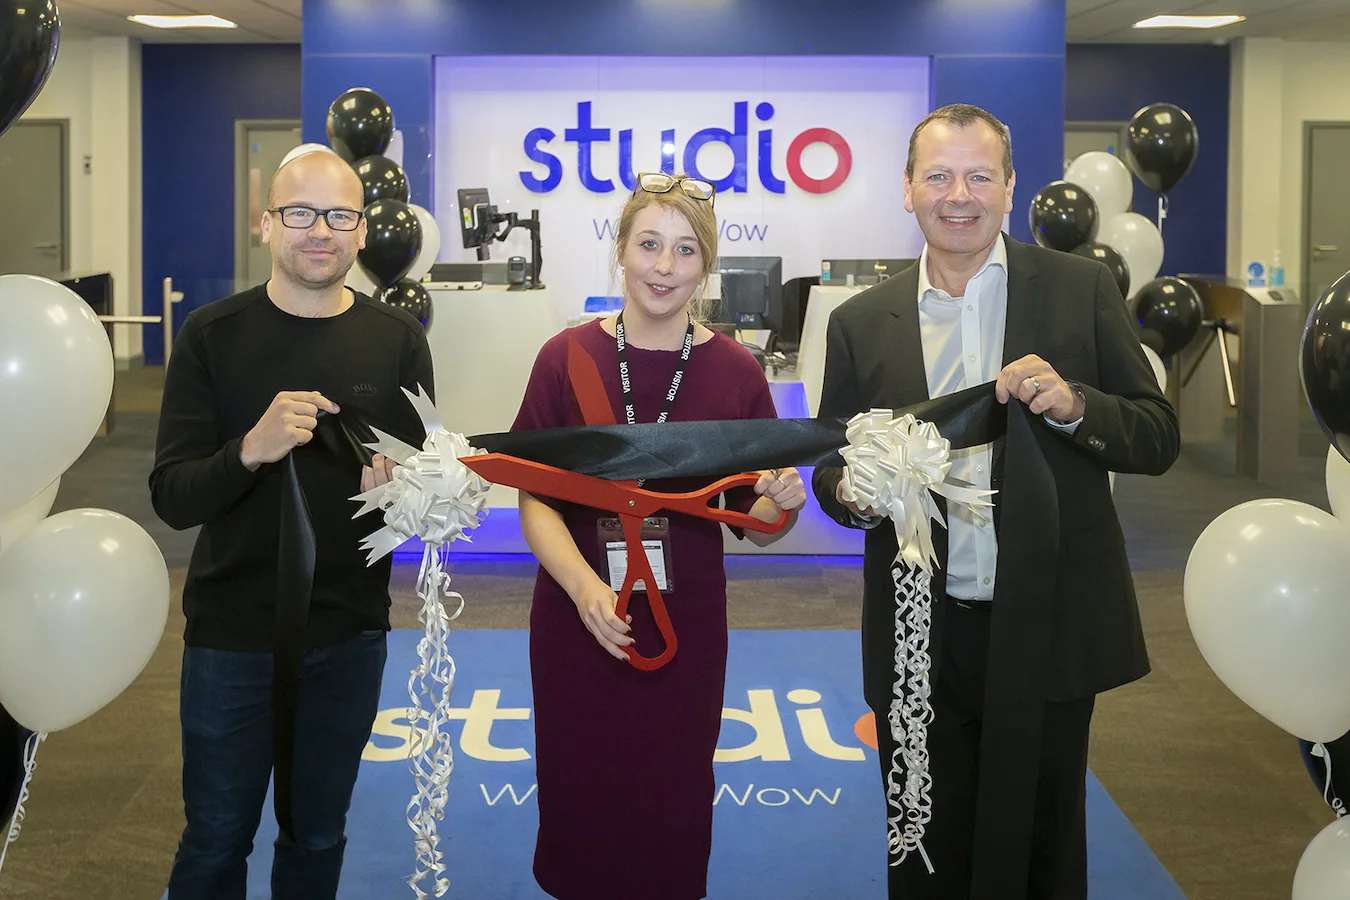 Studio Retail separates its financial services division with expansion and growth